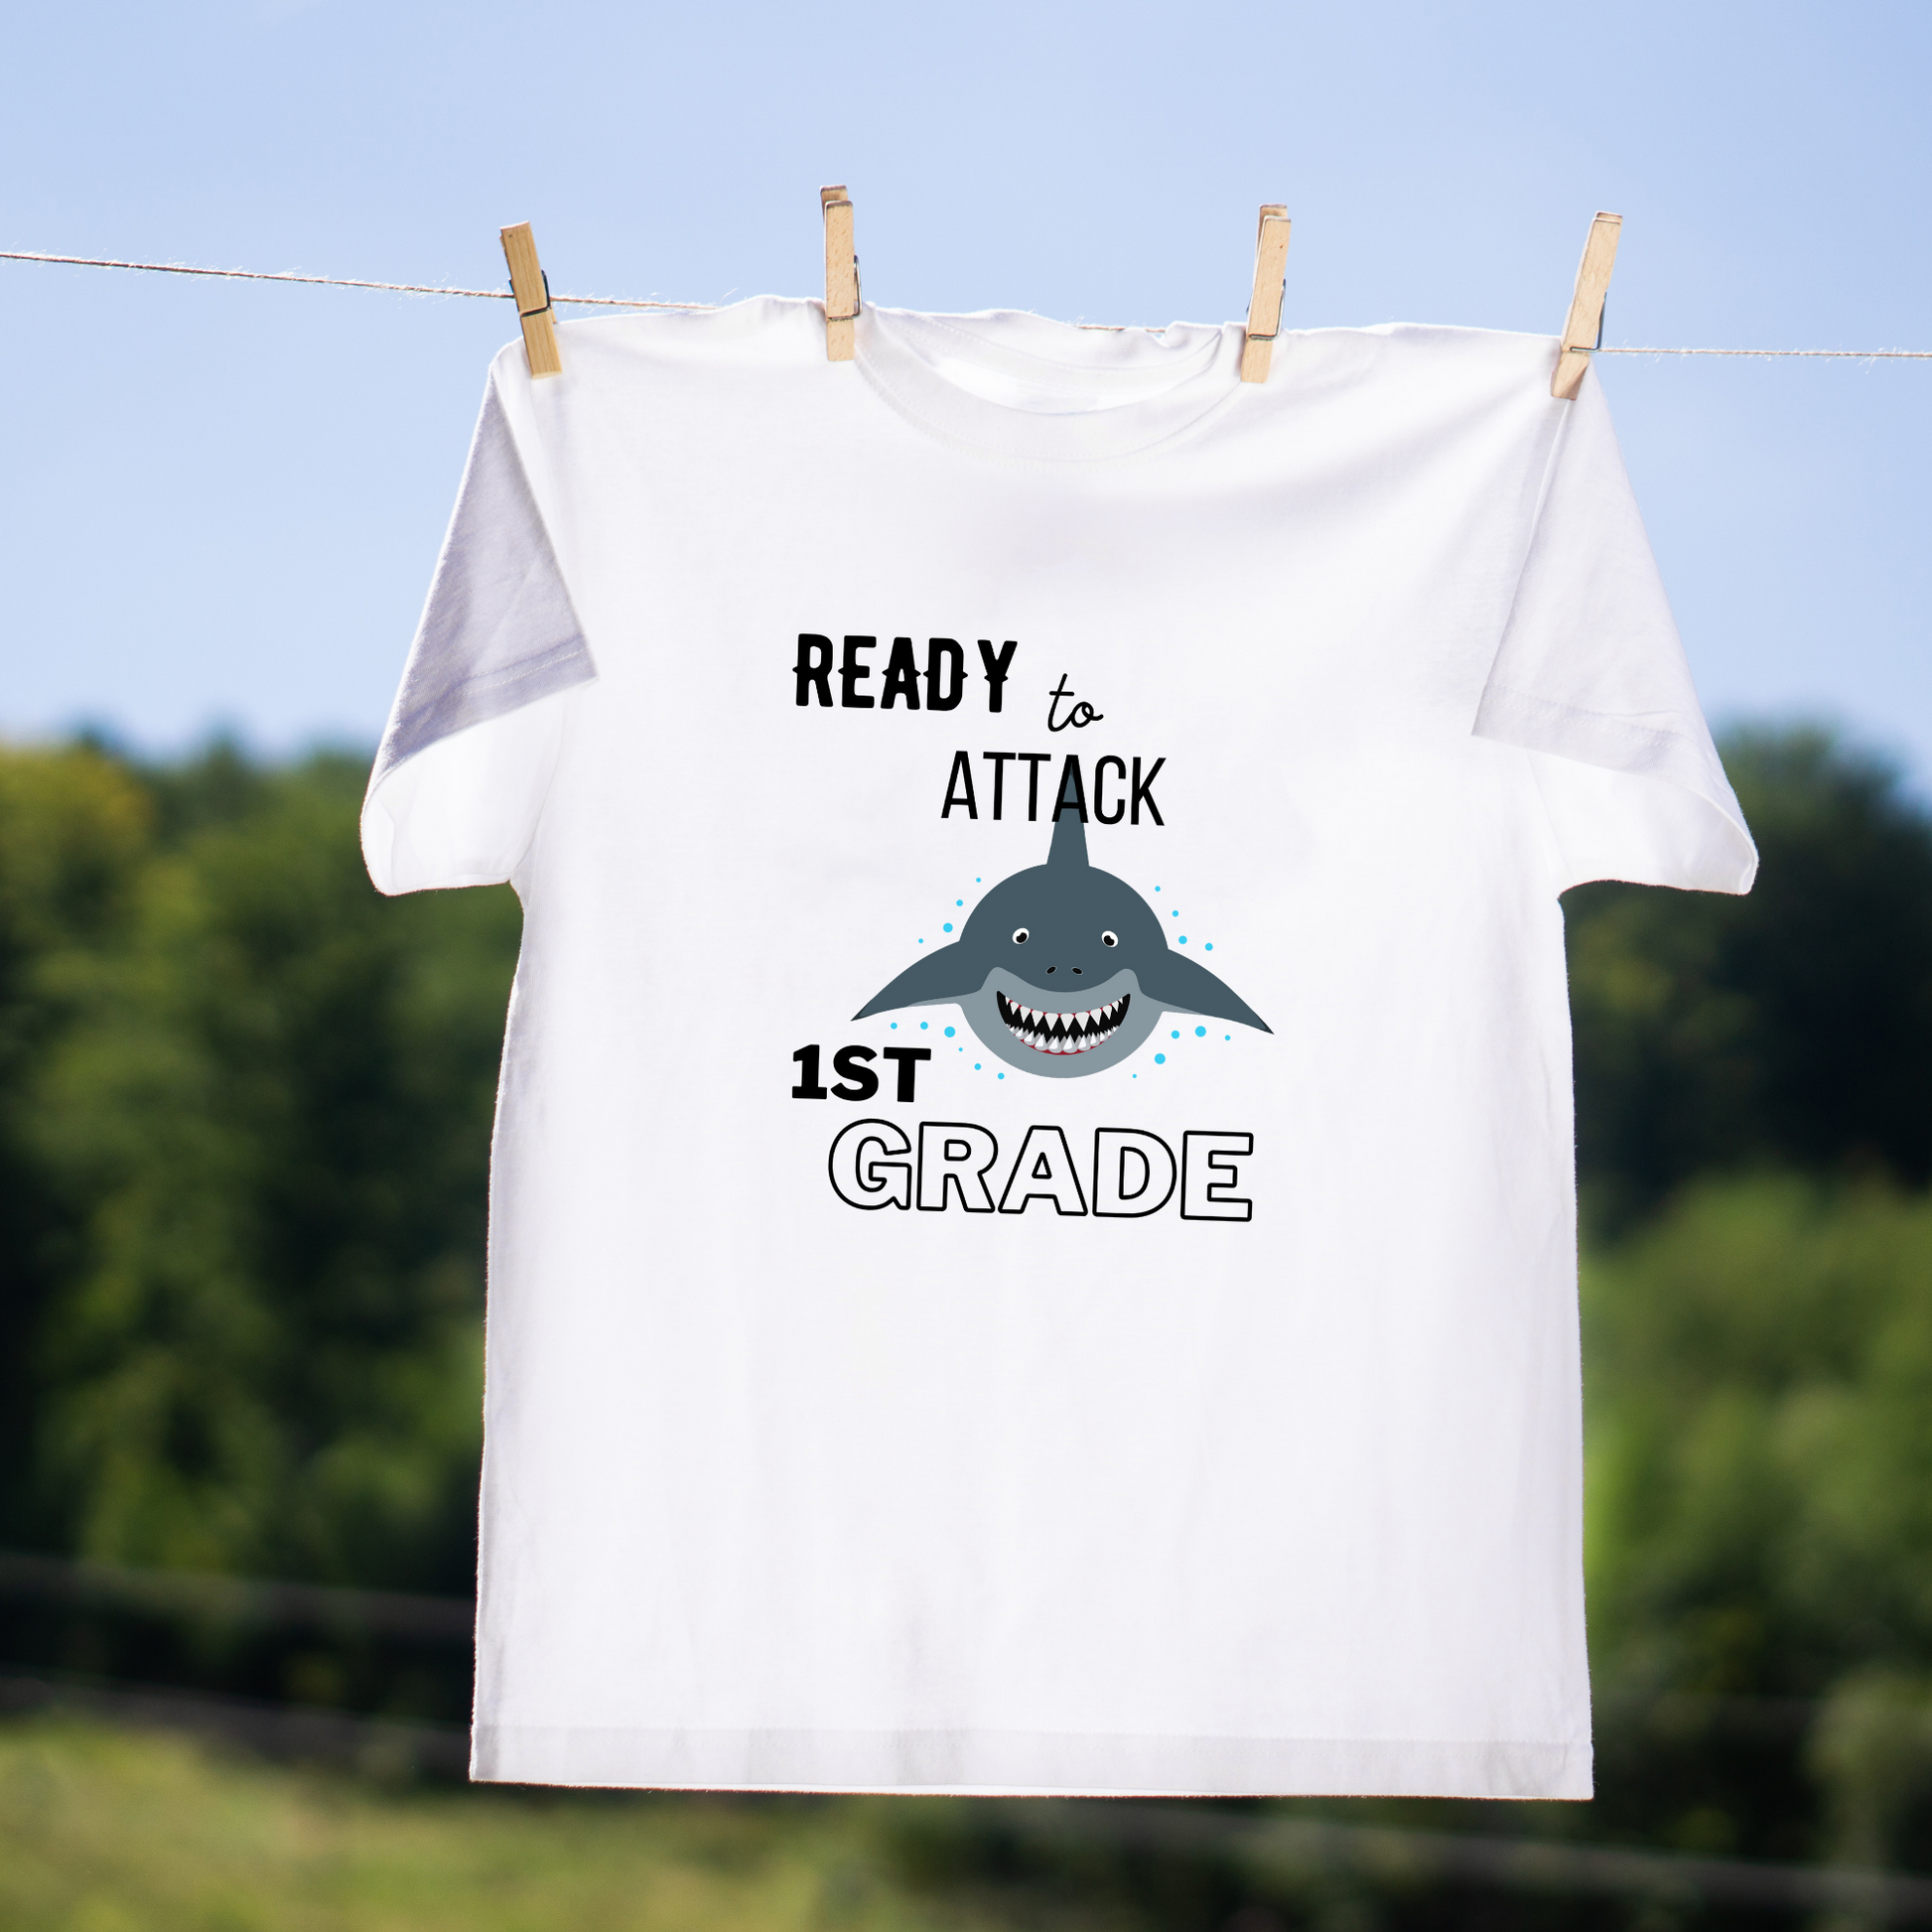 First Day of School T-shirt for children